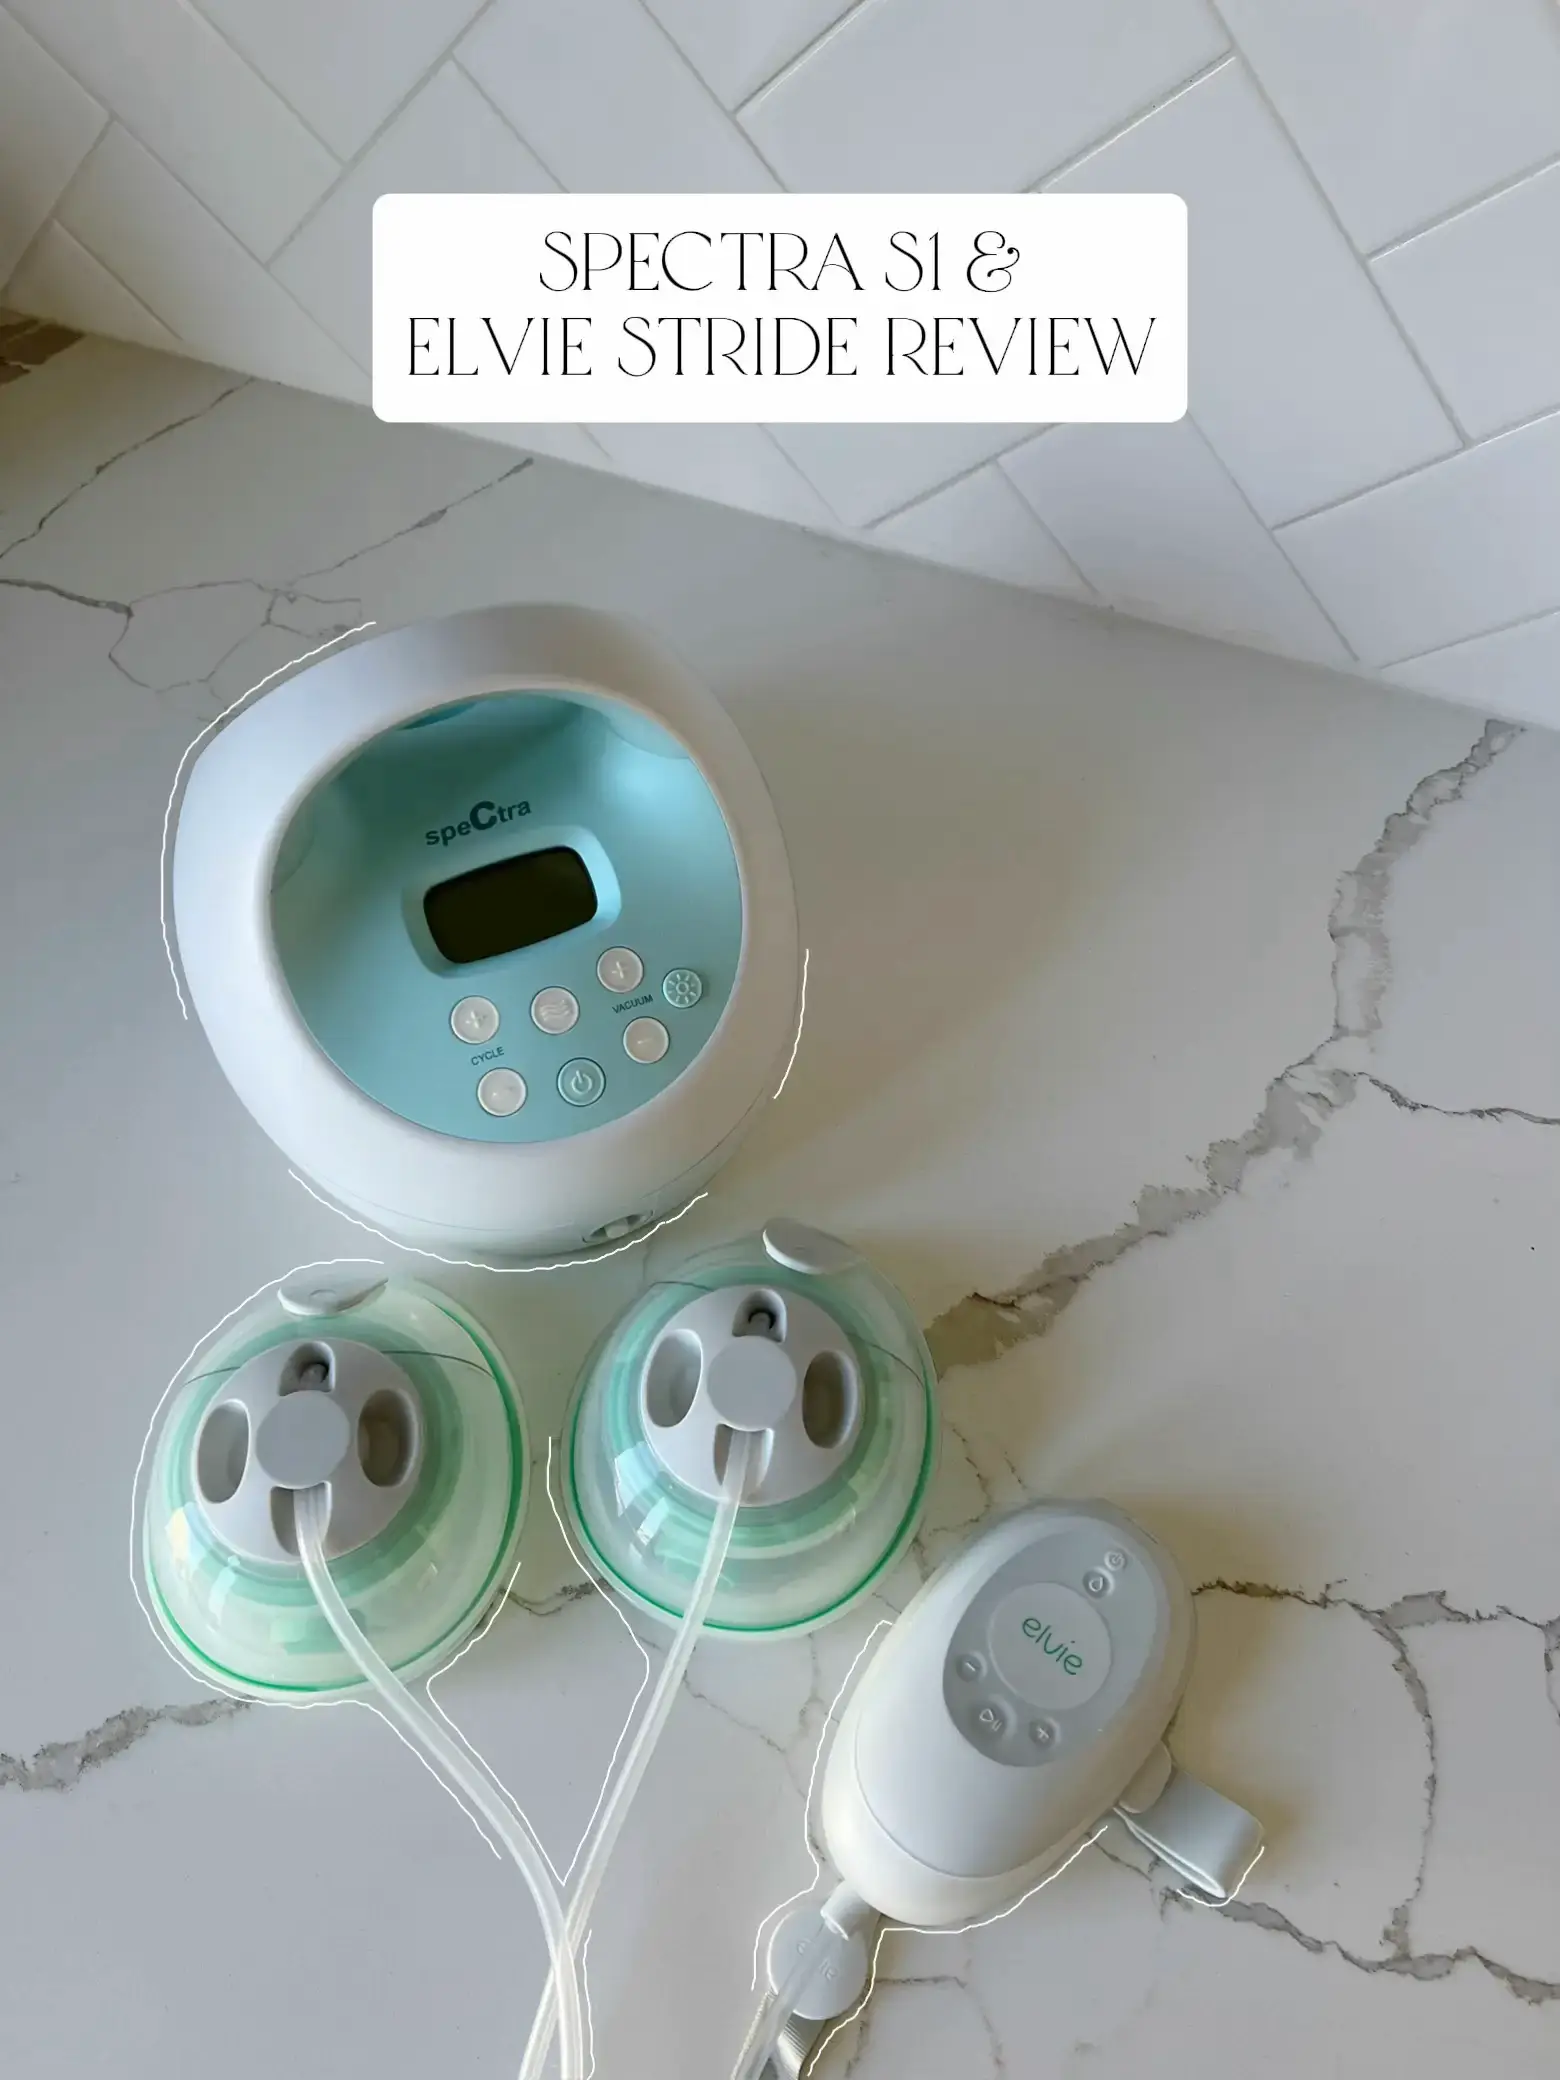 Discover the Easy Way to Clean Elvie Stride: Your Guide